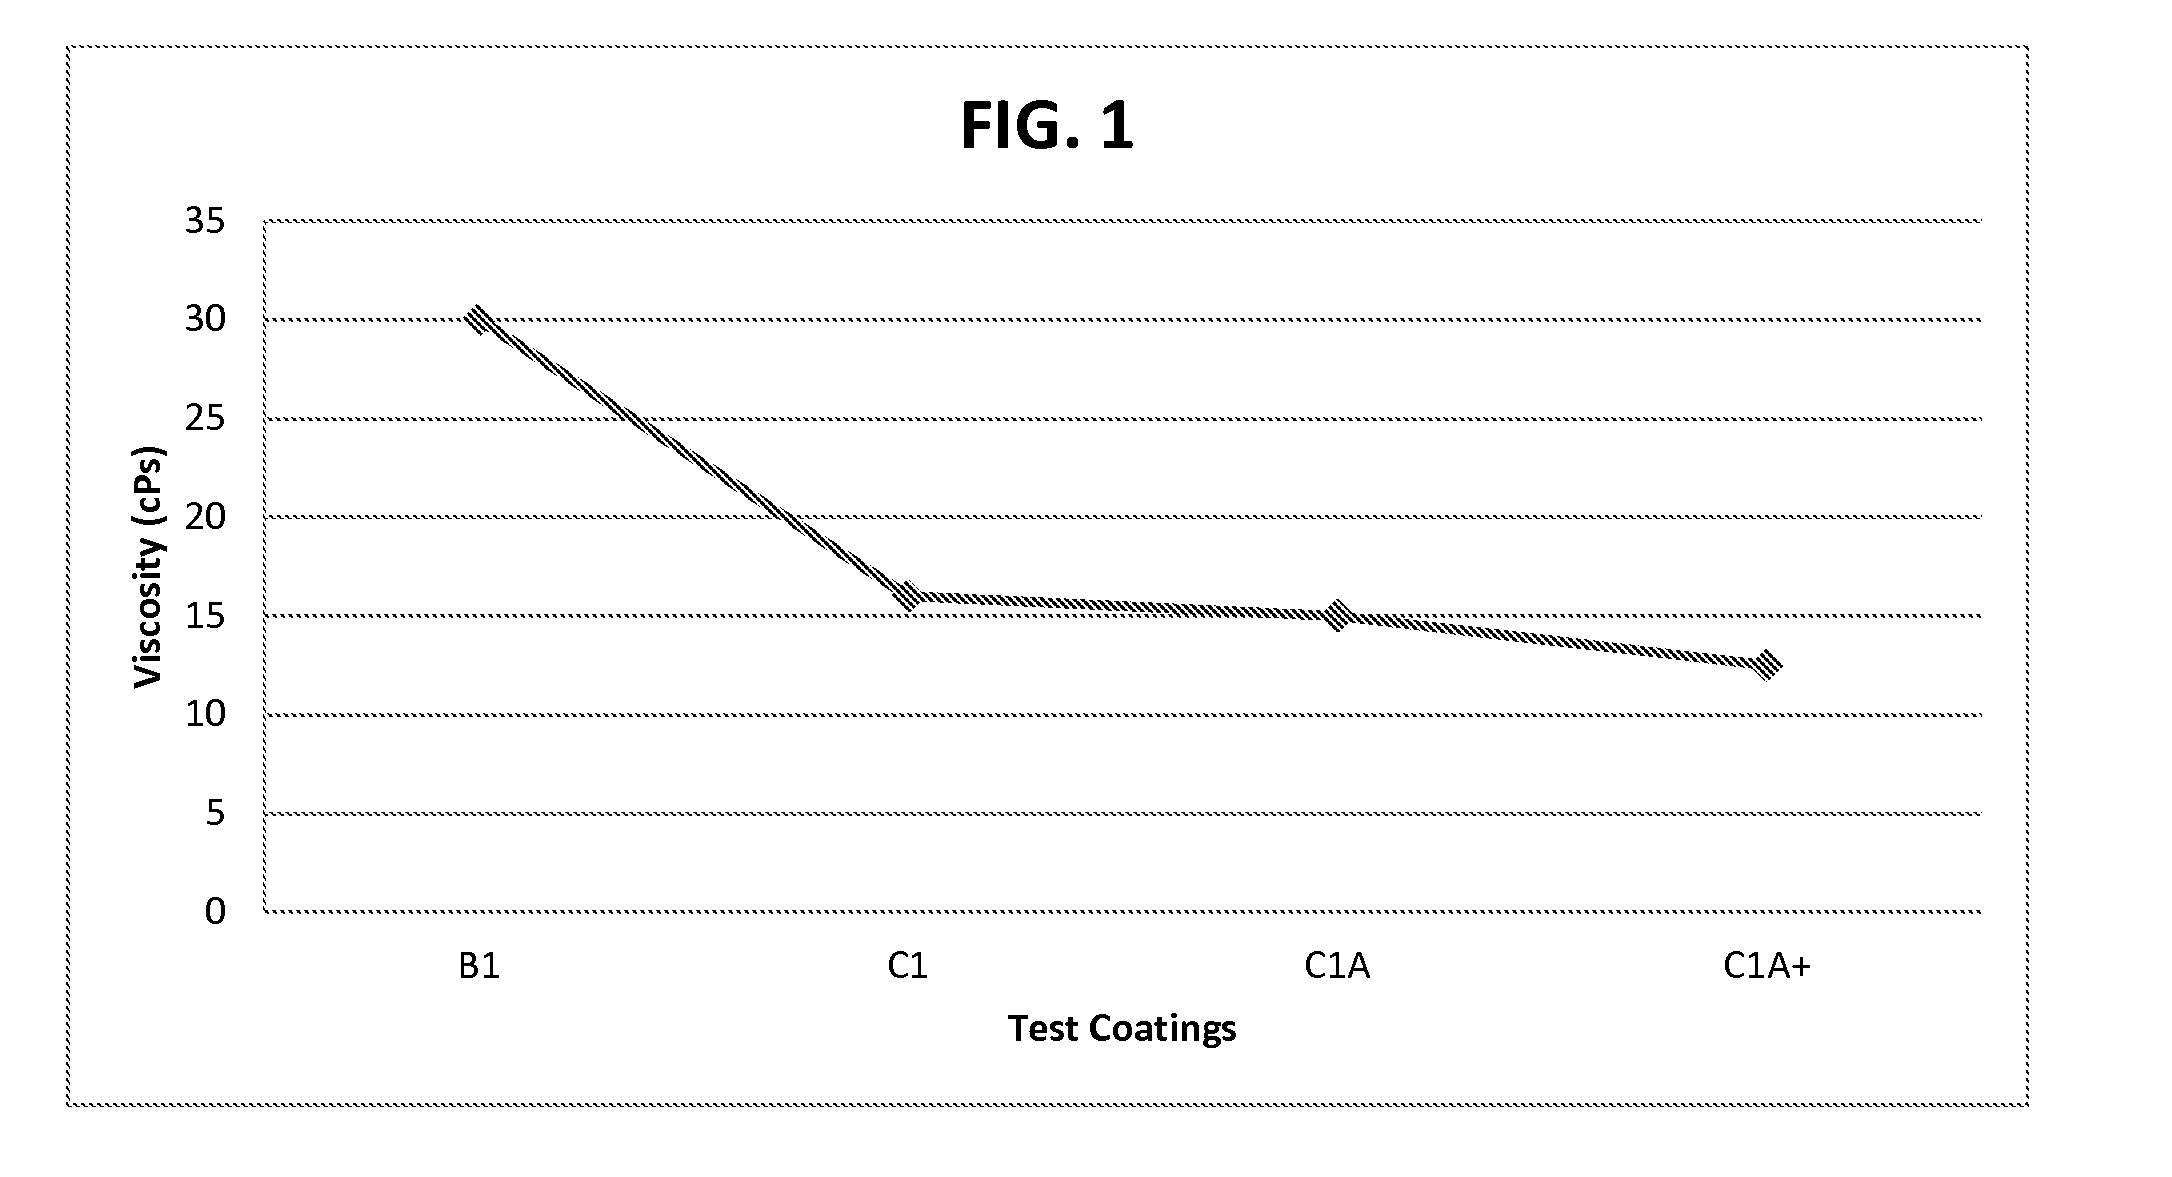 Moisture-resistant edible food coating and method for applying the same